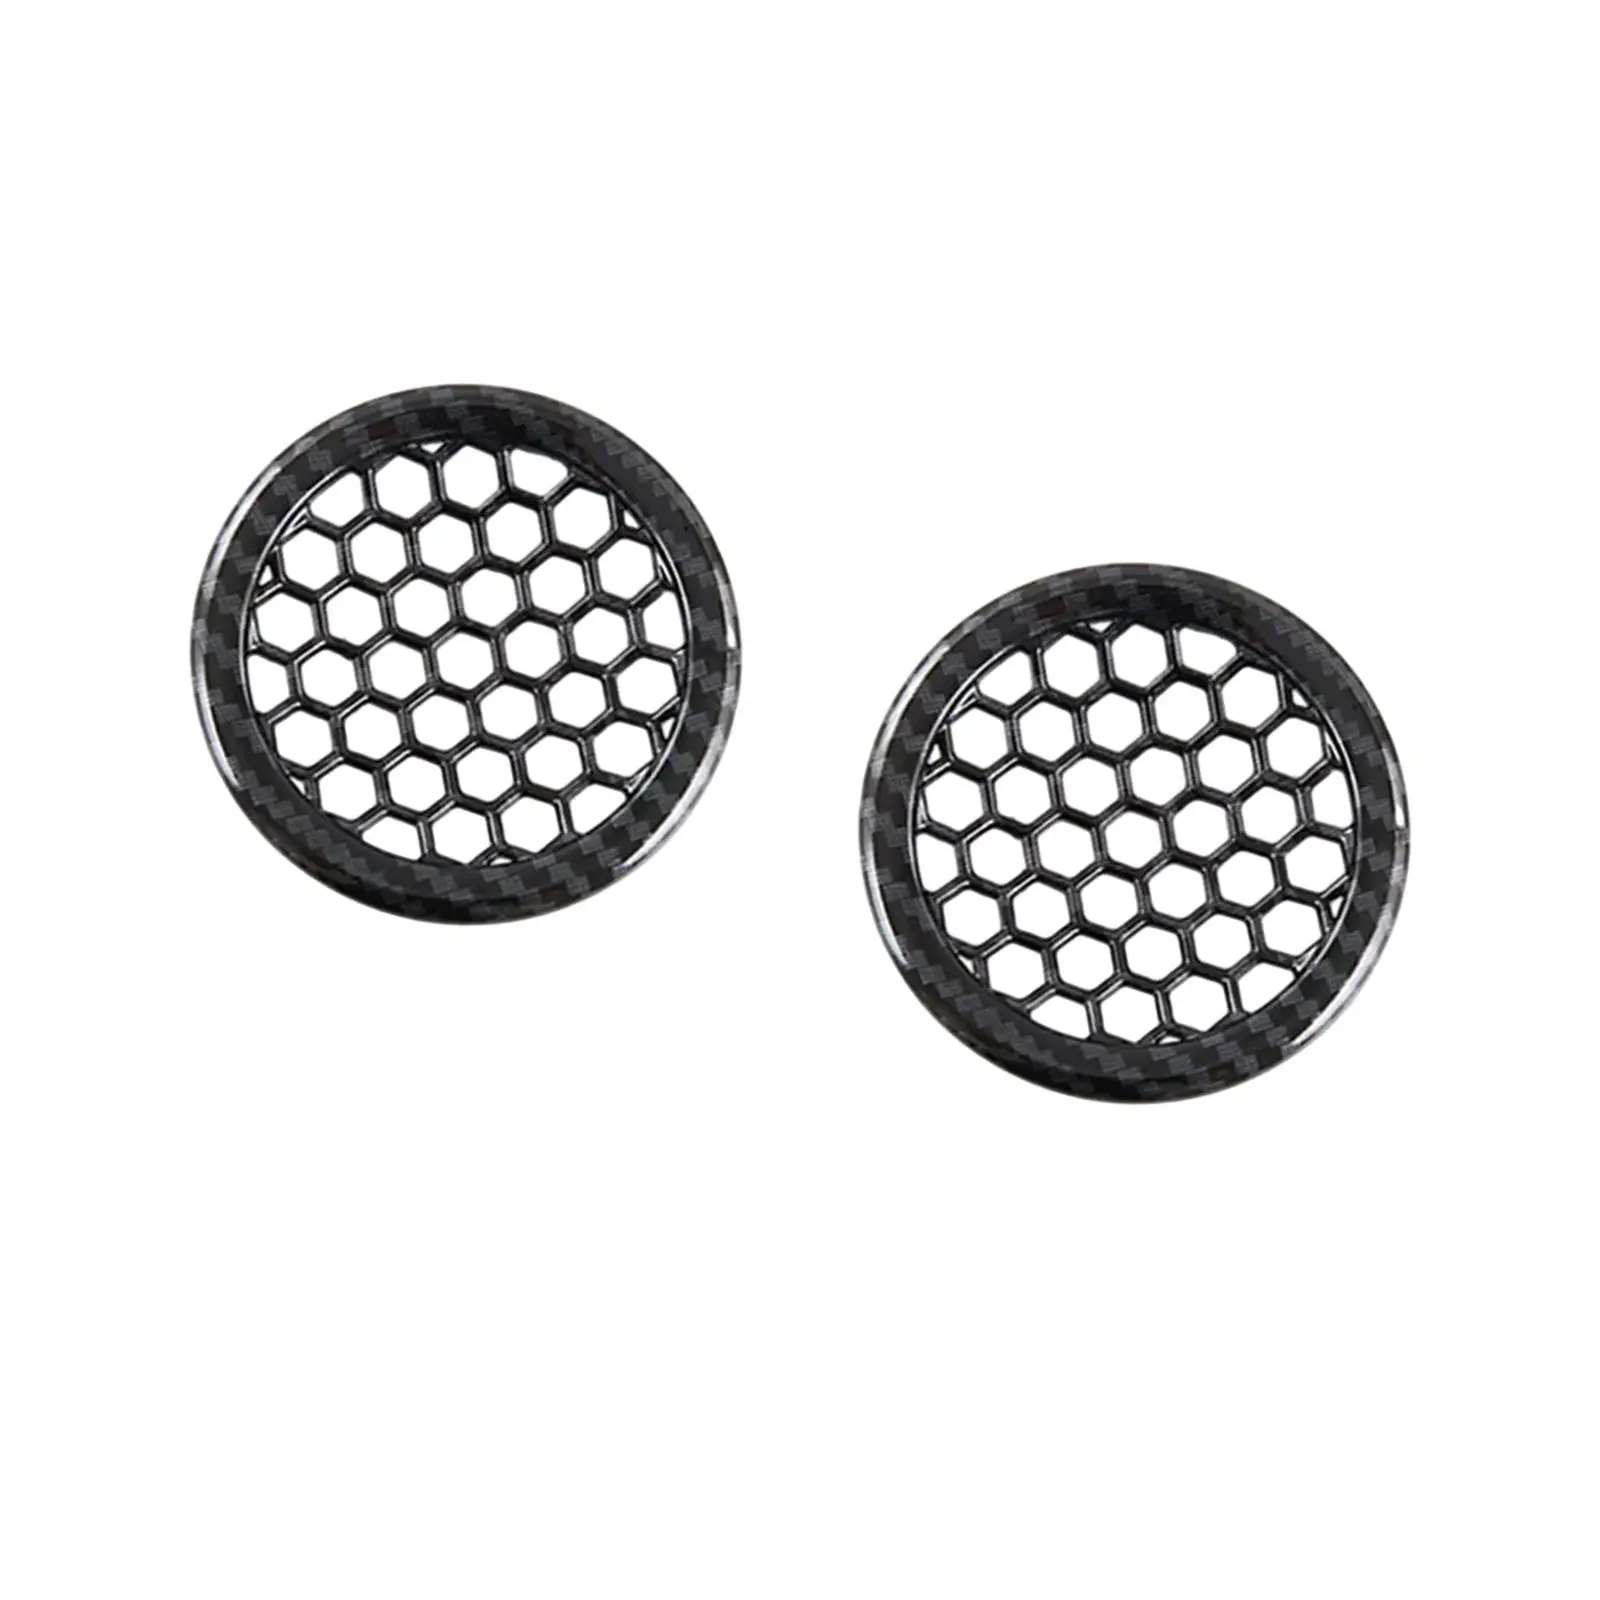 2x Car Inner Door Horn Ring Covers Carbon Fiber Car Parts Auto Speaker Ring Durable Loudspeaker Circle Trim for Byd Dolphin